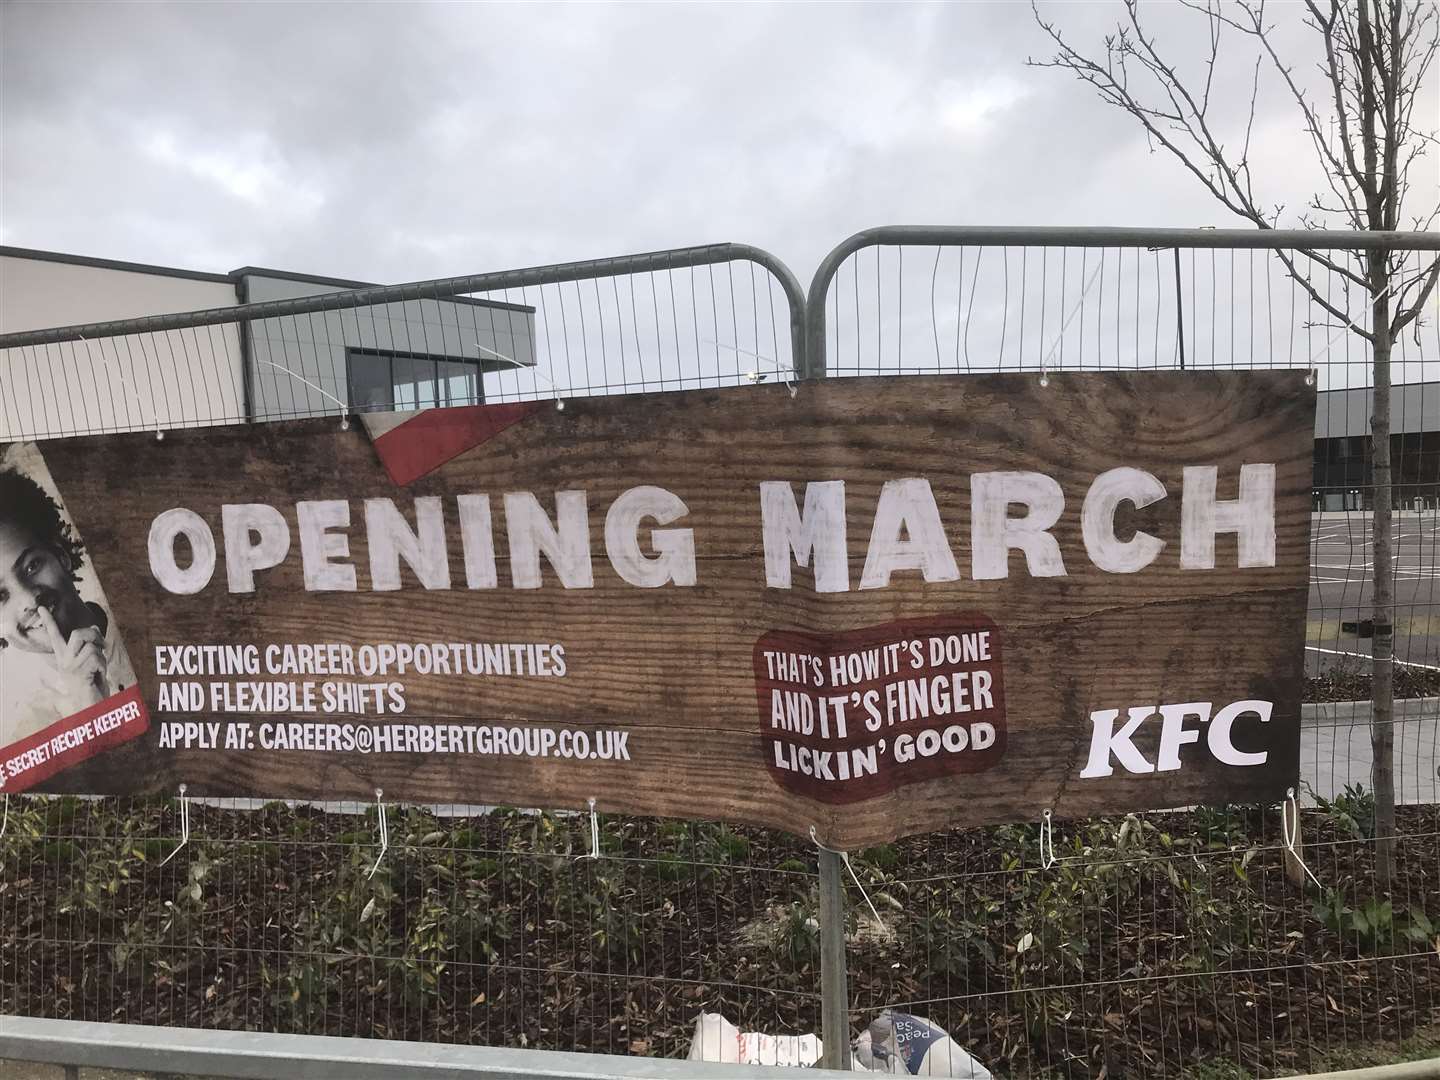 A sign advertising jobs has now appeared outside the site in Chatham